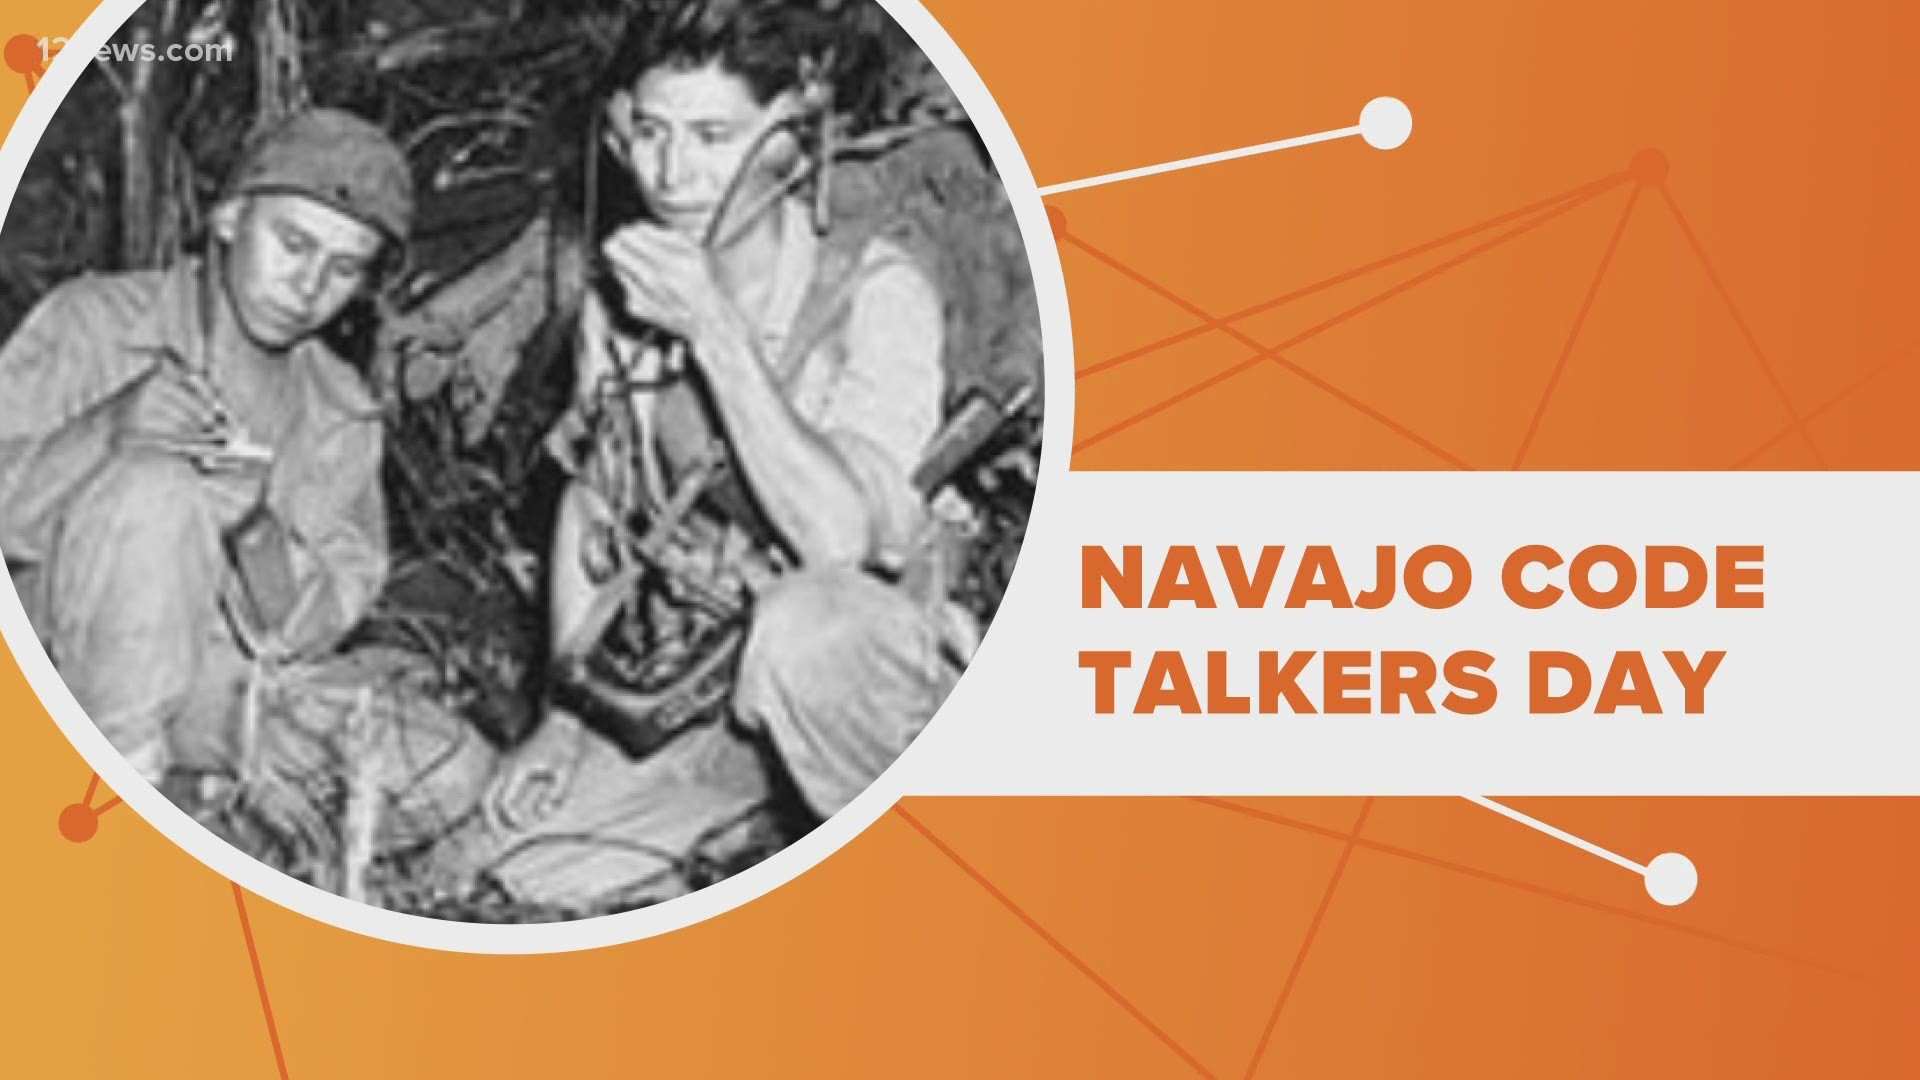 Friday is Navajo Code Talkers Day, a day to honor the Code Talkers who helped the United States win World War II. We're connecting the dots.